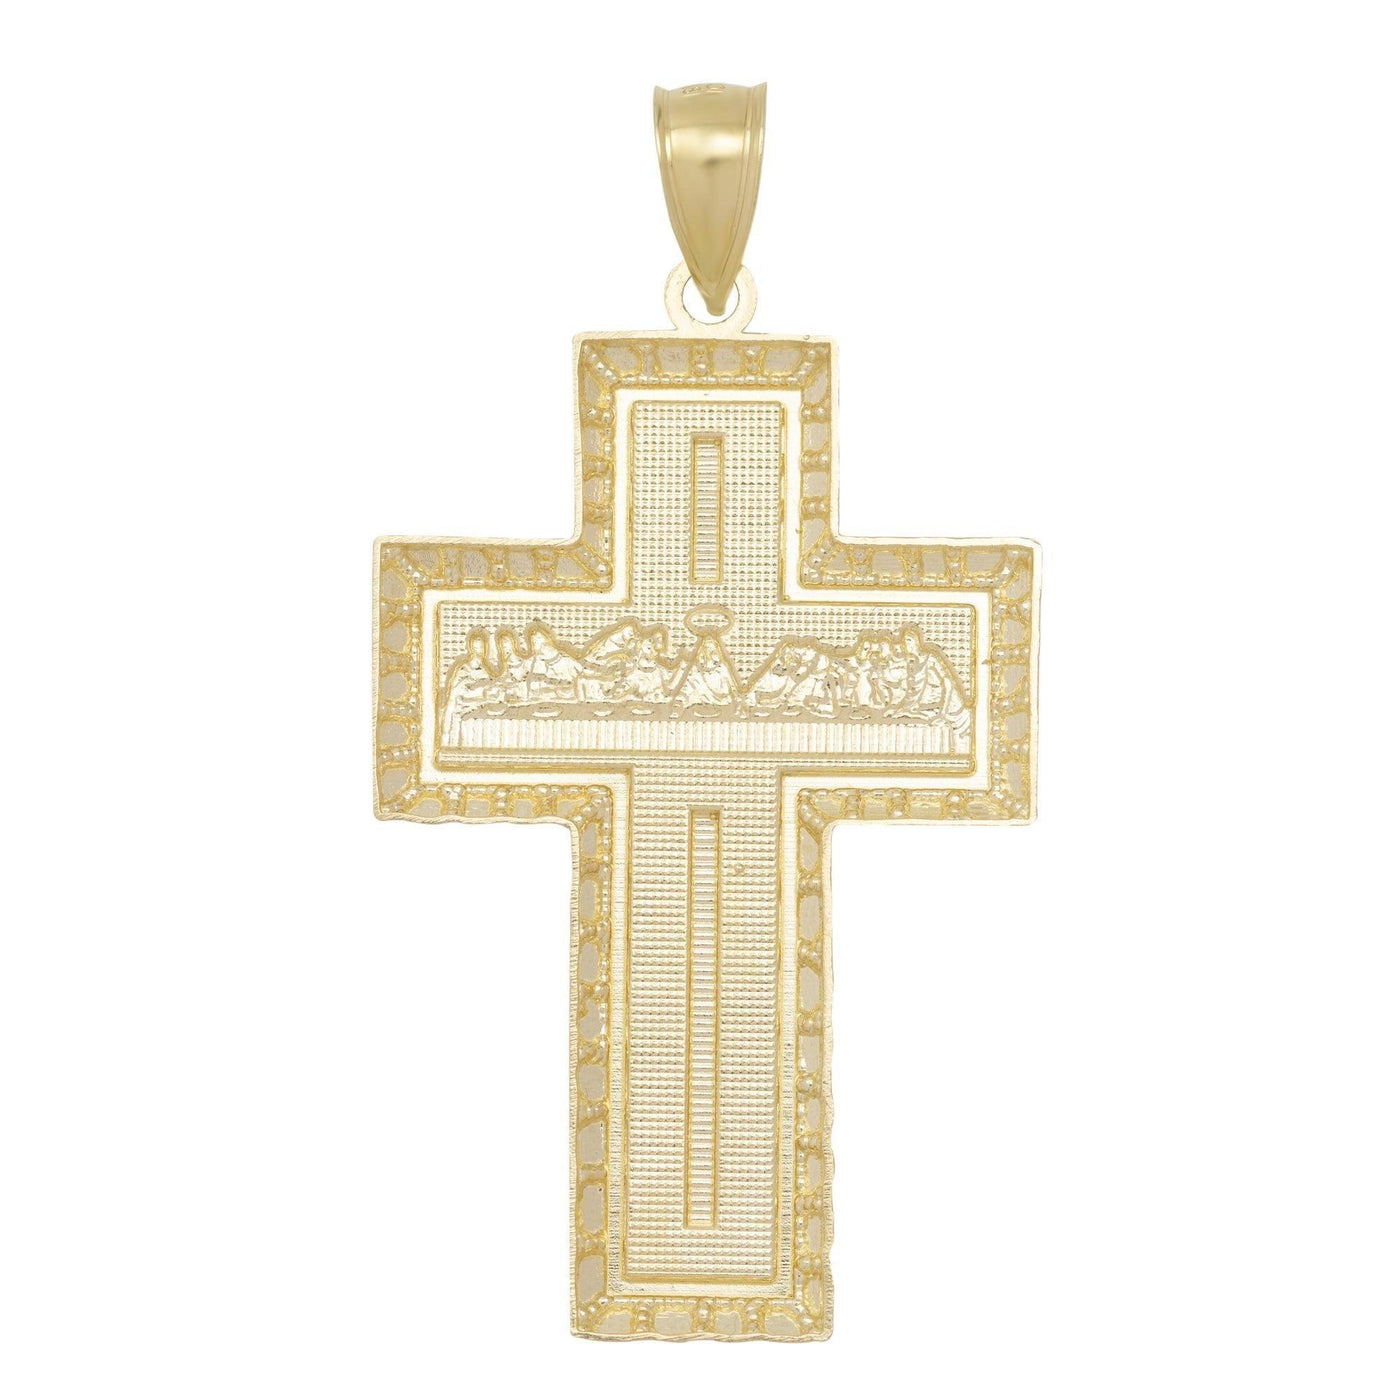 3 3/4" Last Supper Nugget Cross Pendant Solid 10K Yellow Gold - bayamjewelry